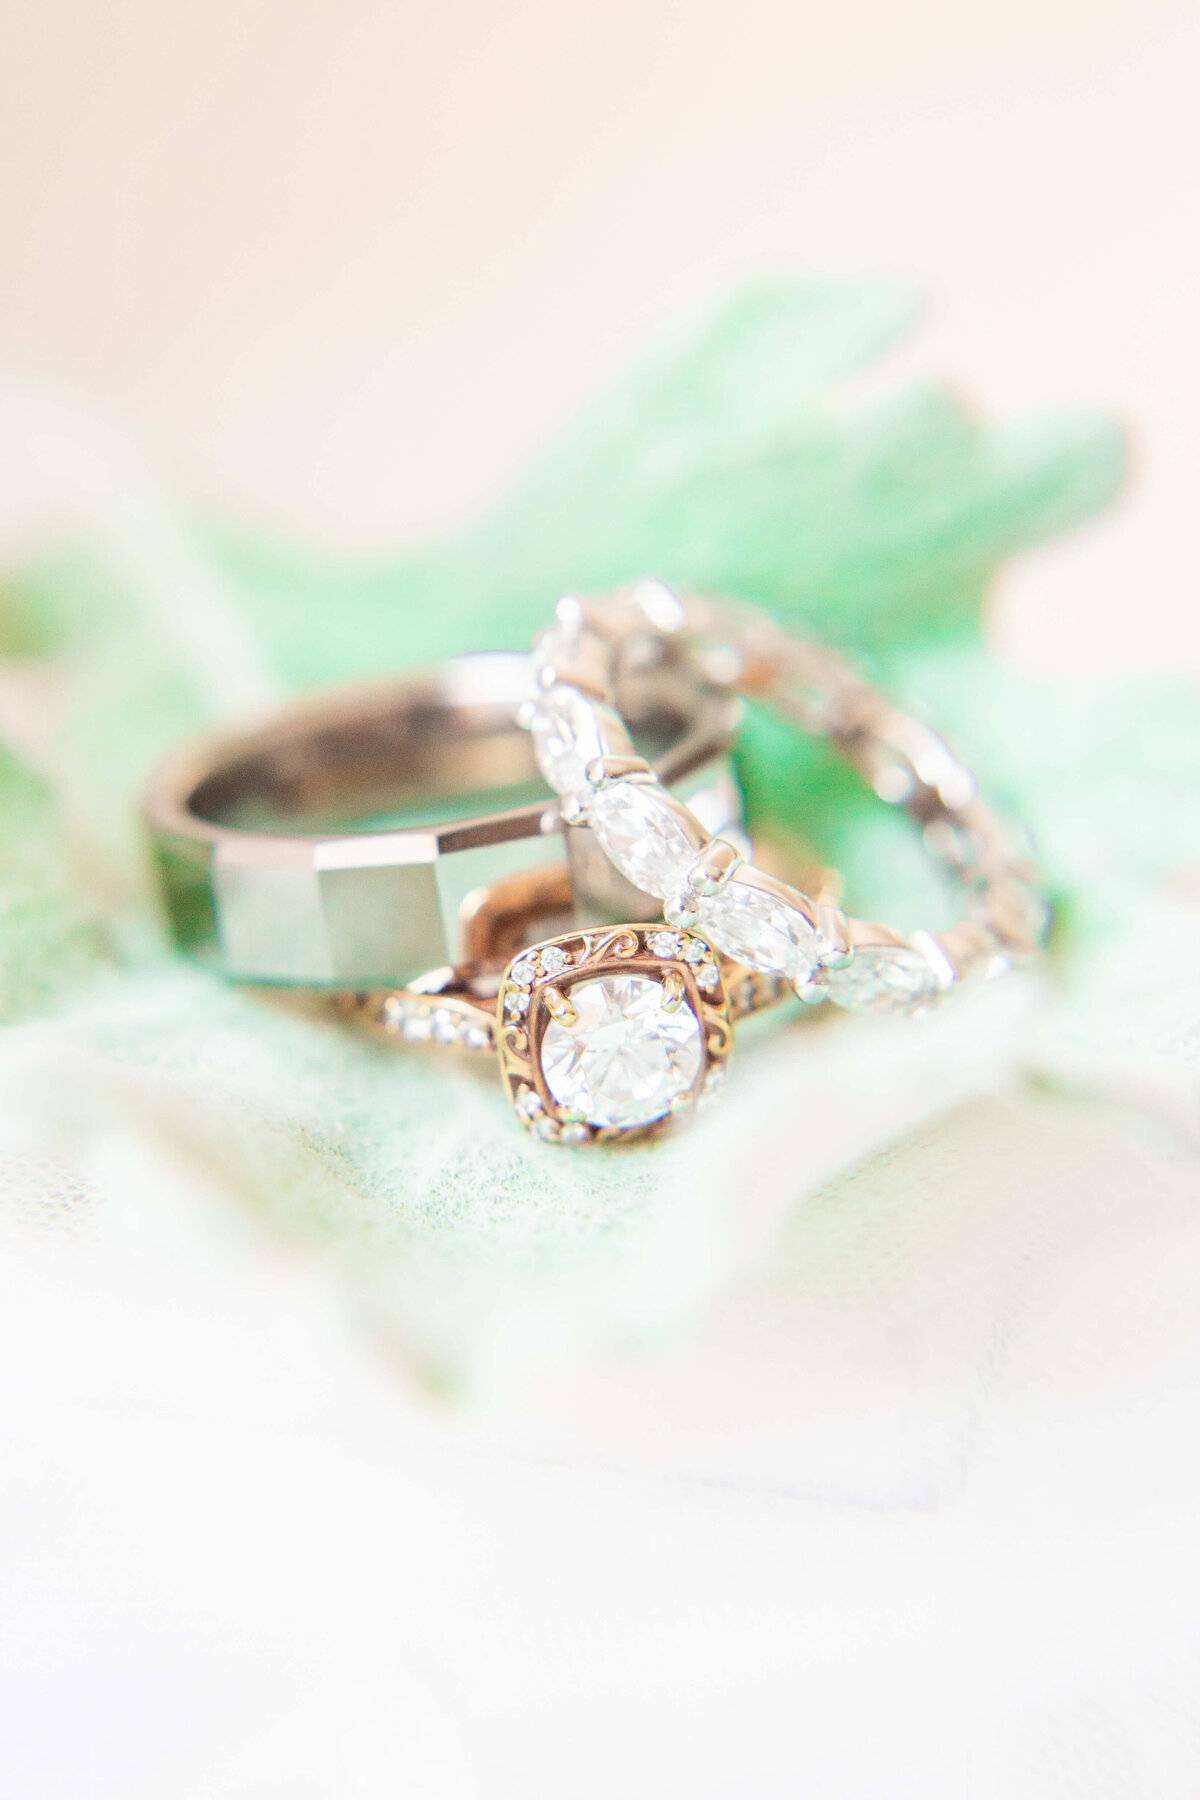 Wedding-engagement-rings-detail-shot-by-Bethany-Lane-Photography-6